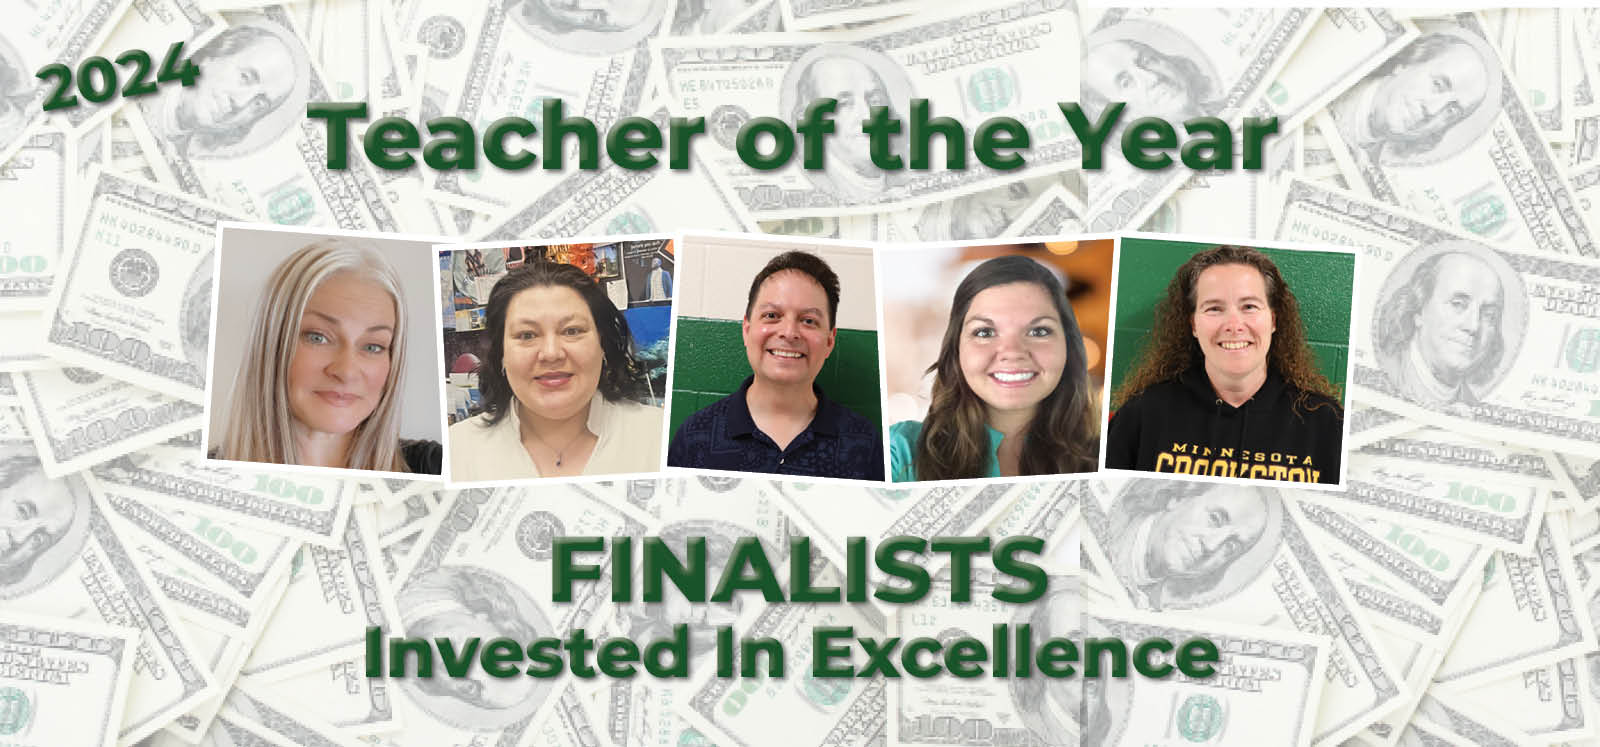 image of teacher of the year finalists